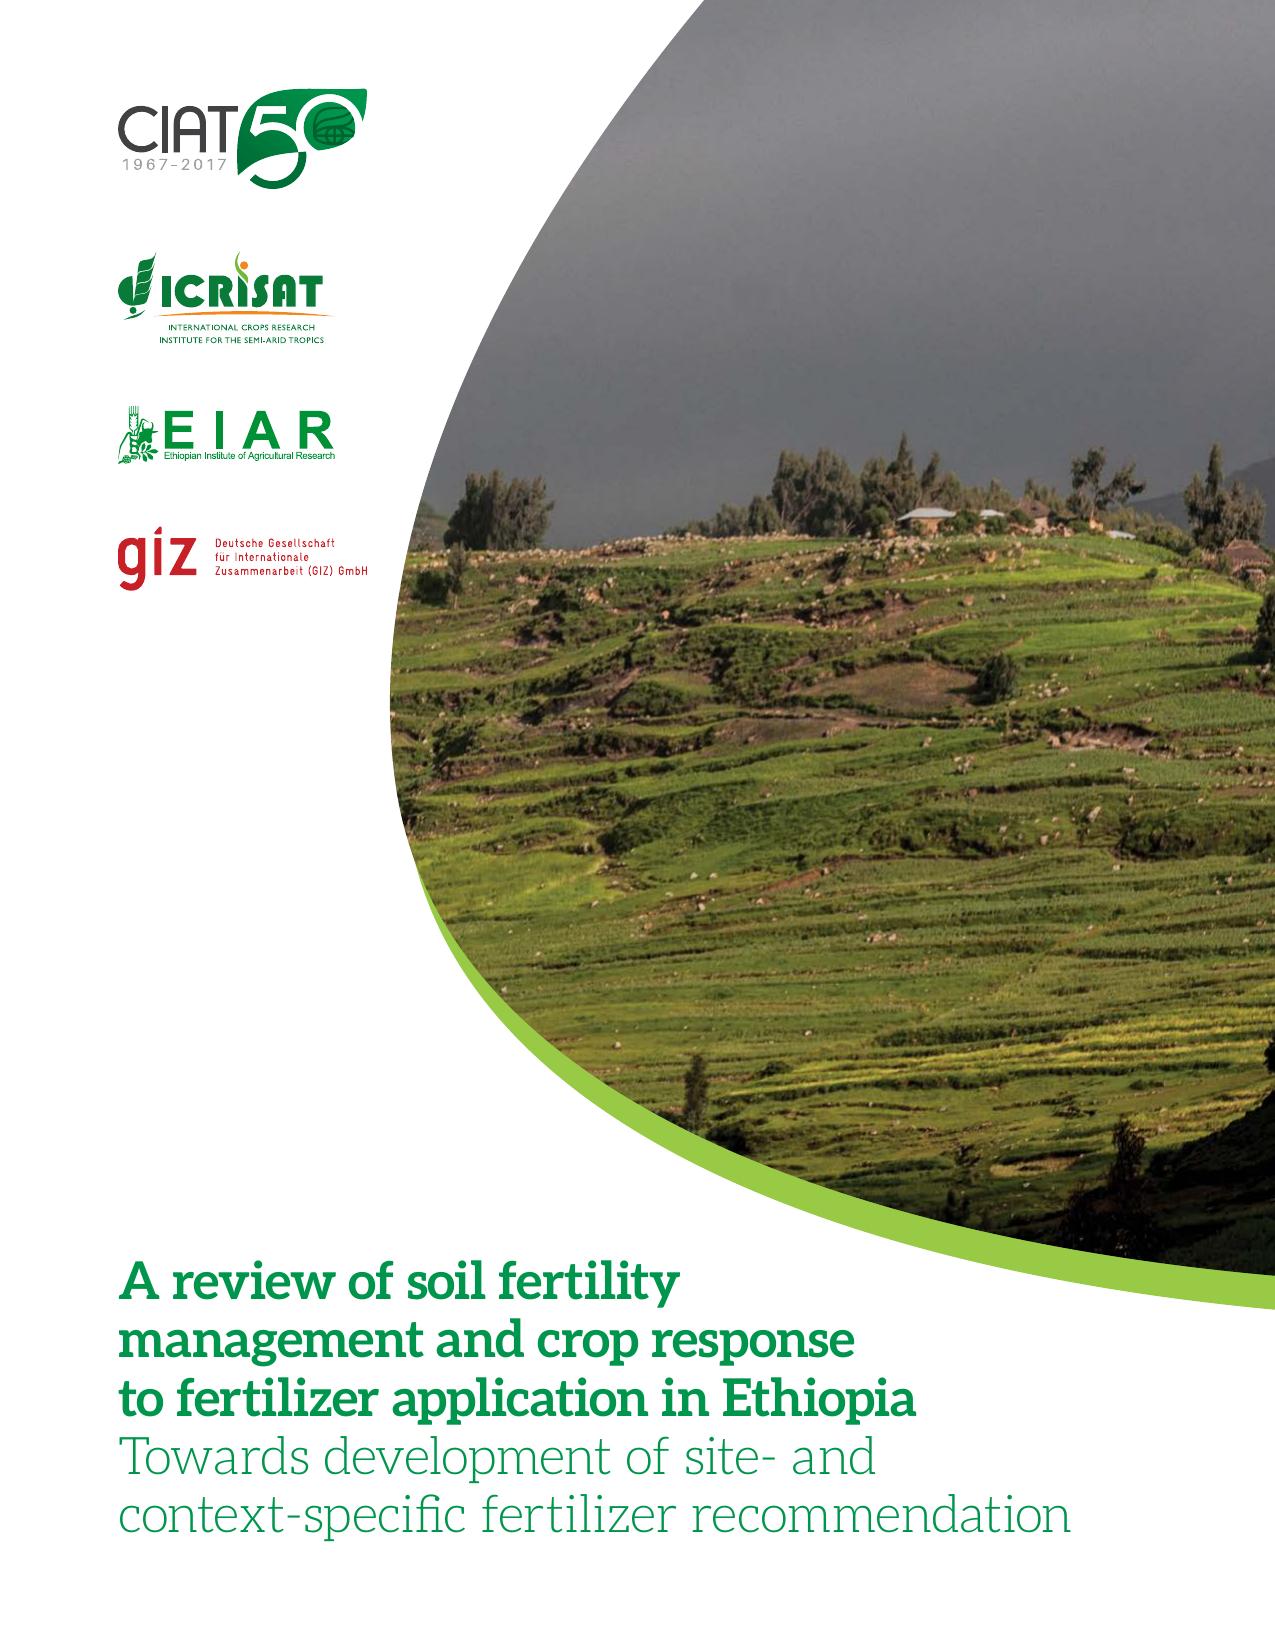 A review of soil fertility management and crop response to fertilizer application in Ethiopia Towards 2017